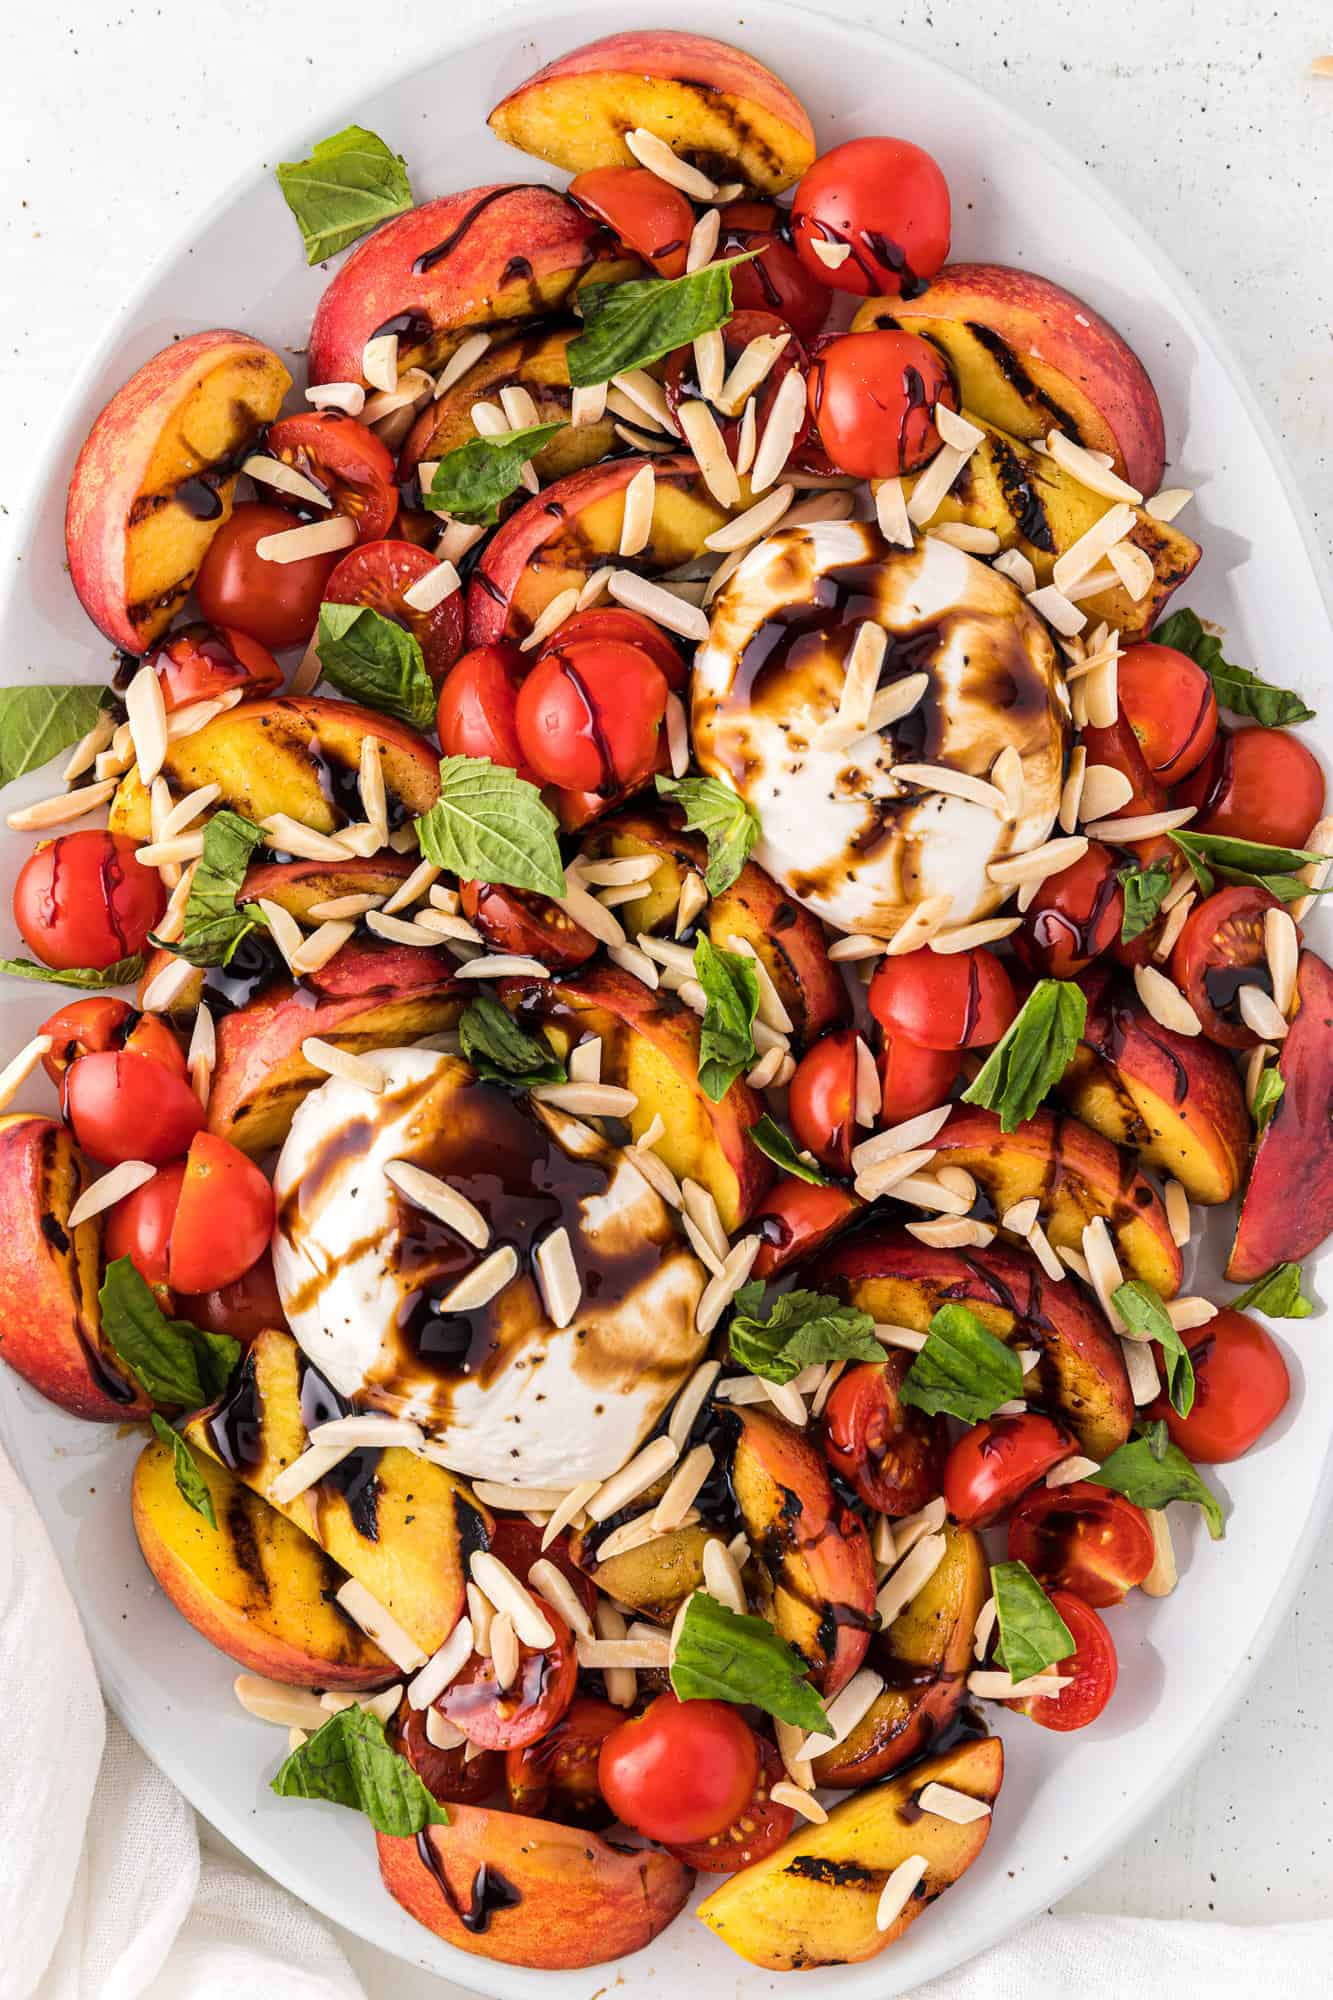 Grilled peach salad arranged around burrata cheese, topped with almonds.